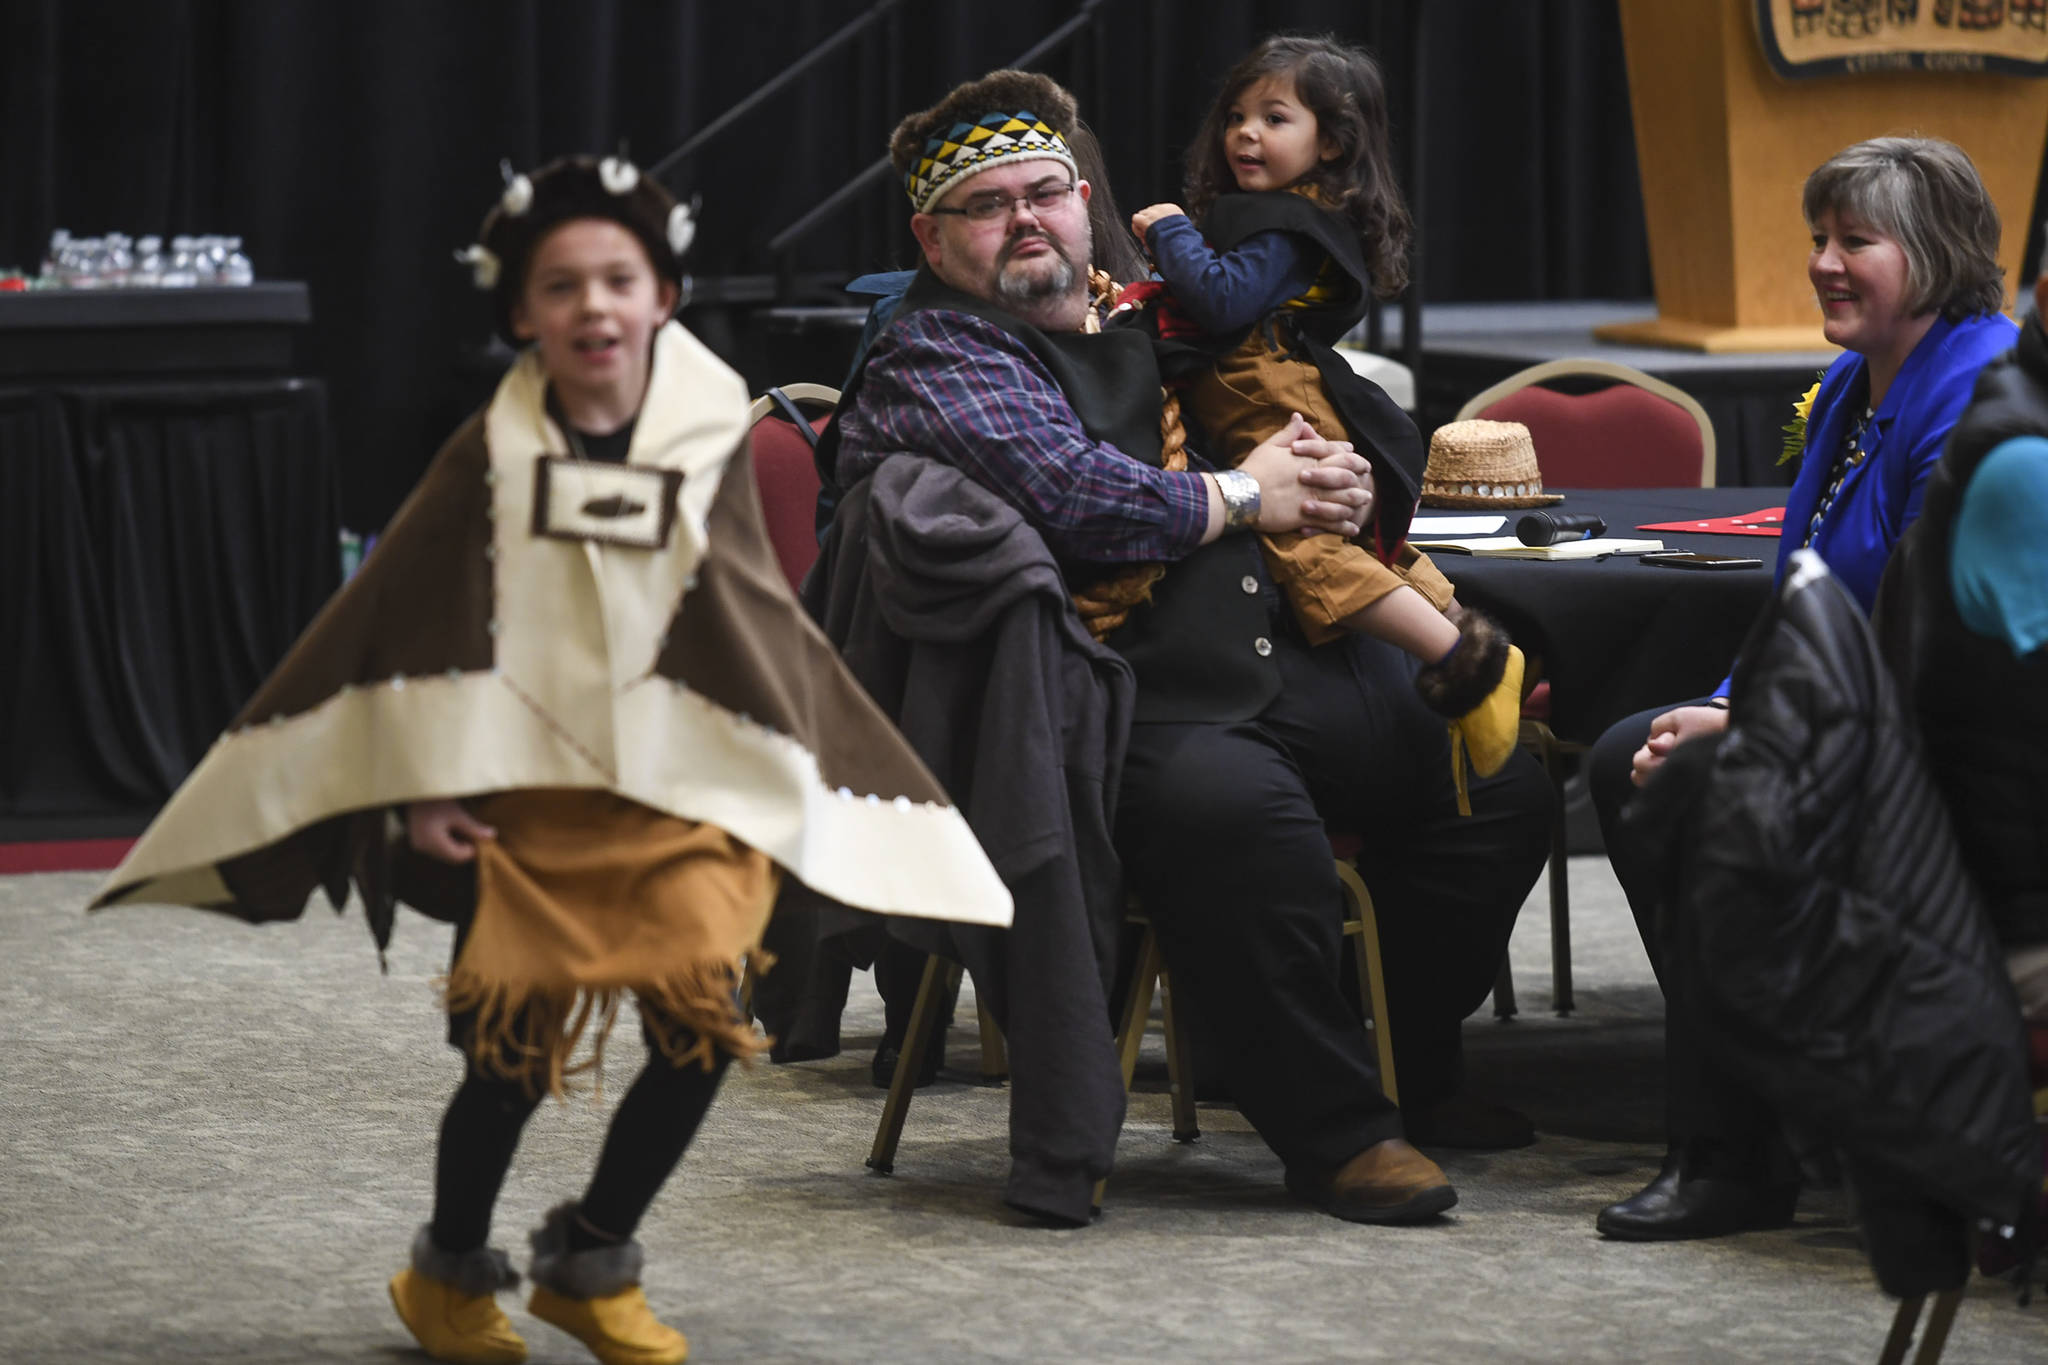 Richard Chalyee Éesh Peterson, President of the Central Council of Tlingit and Haida Indian Tribes of Alaska, holds Guillermo Contreras, 3, as Tristen Washington, 9, of the Xaadaas Dagwii Dance Group performs at the Elizabeth Peratrovich Hall for Indigenous Peoples’ Day on Monday, Oct. 14, 2019. (Michael Penn | Juneau Empire)